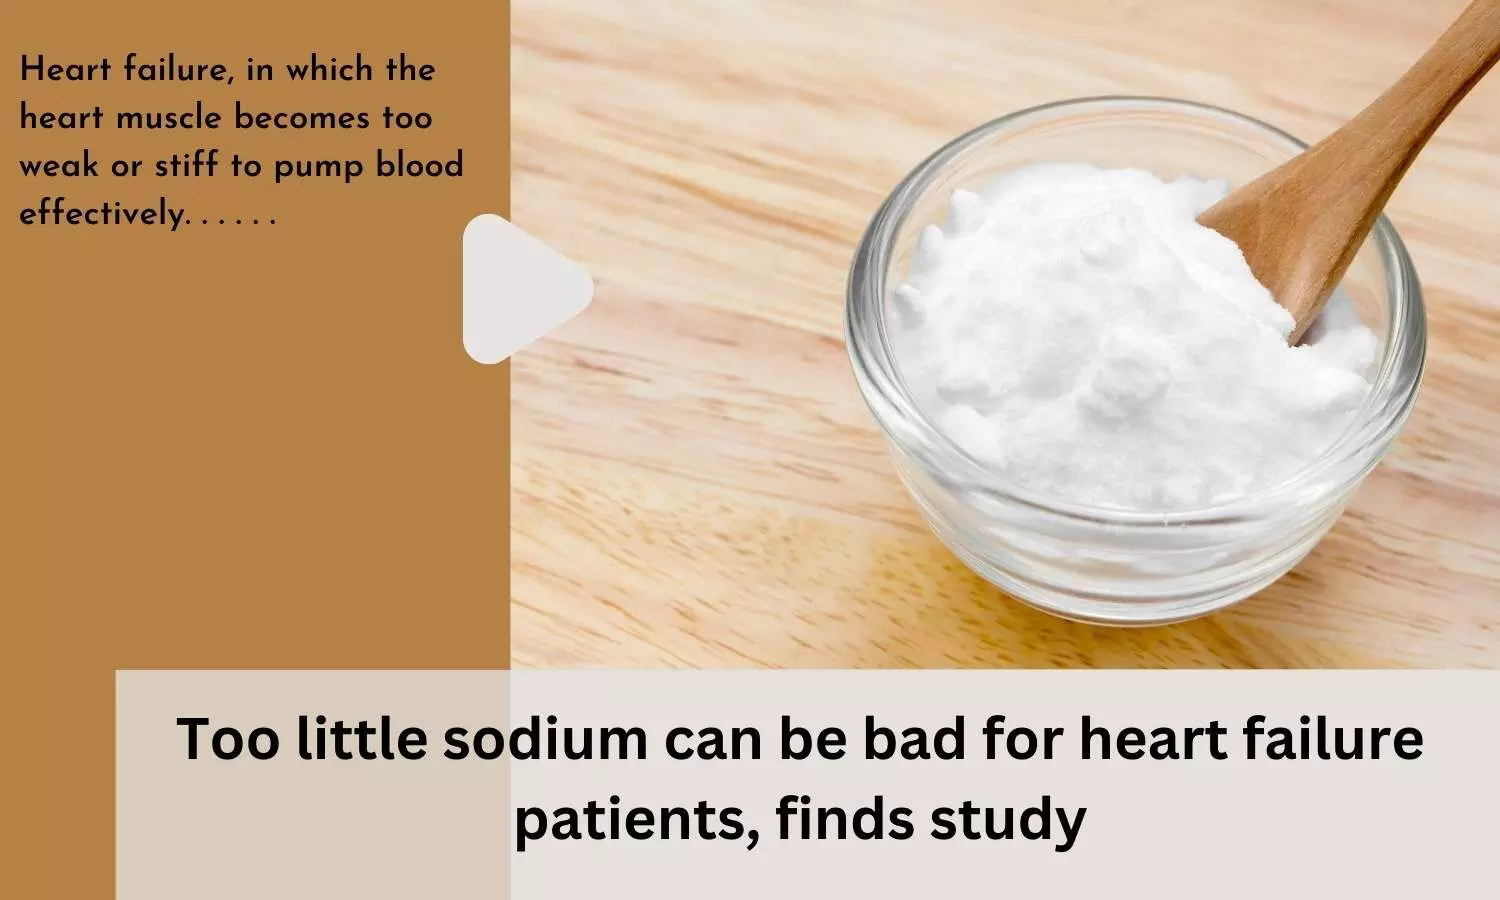 Too little sodium can be bad for heart failure patients, finds study